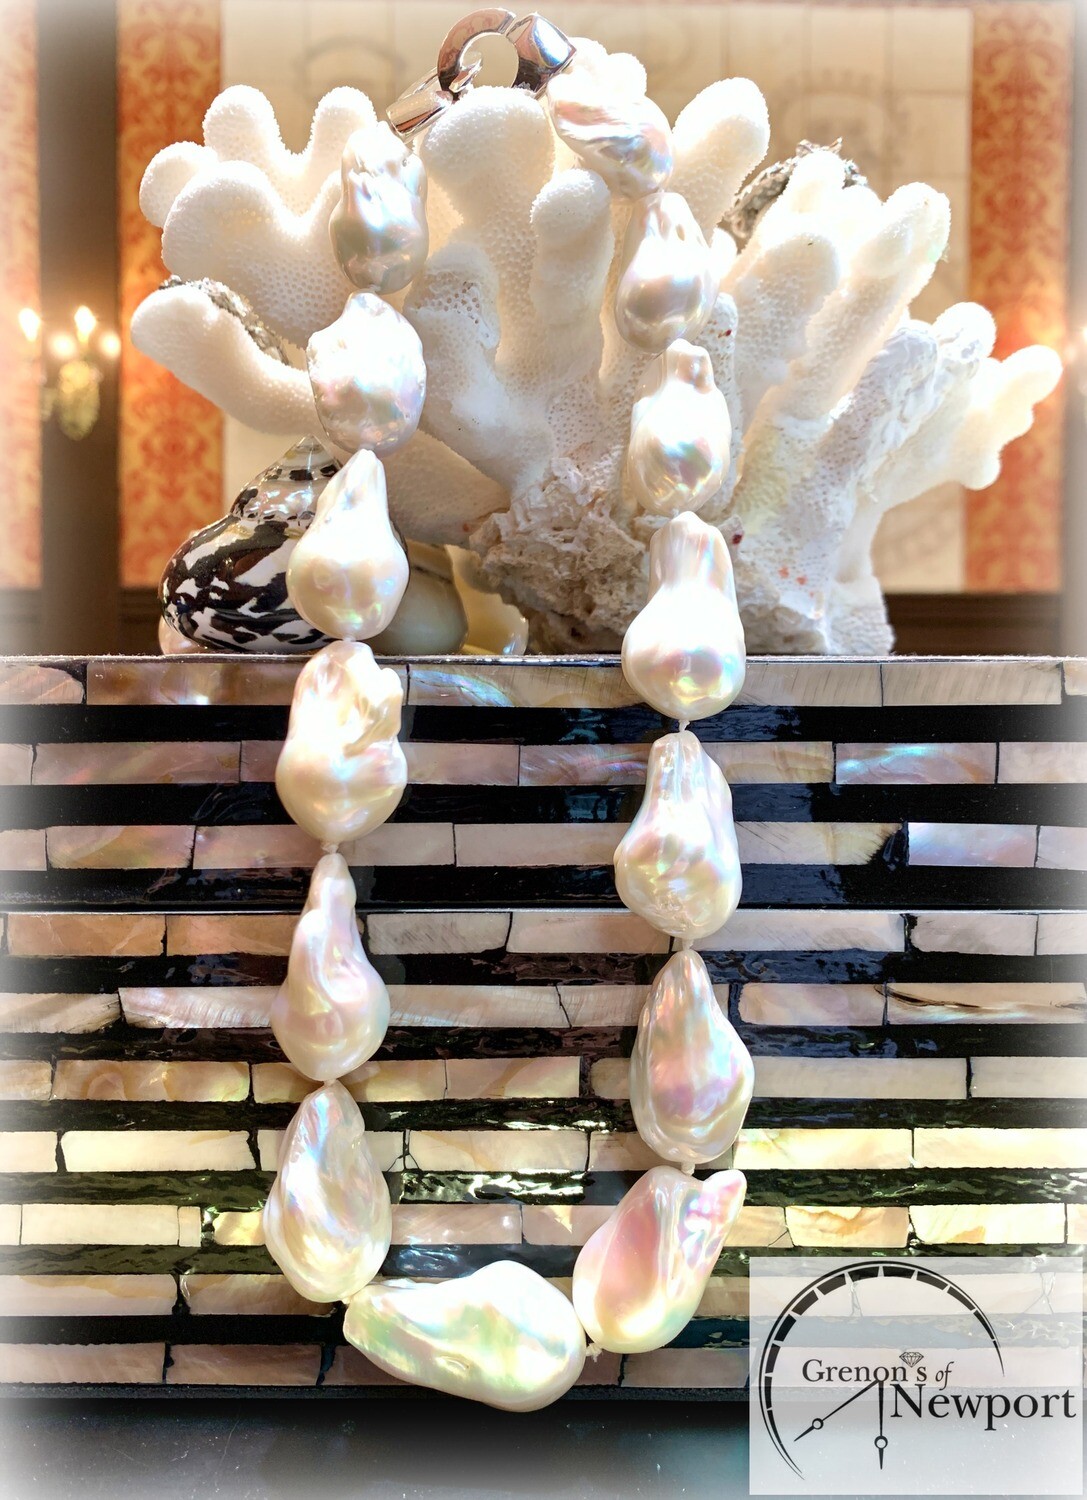 Mastoloni Sterling Silver 18-20mm Freshwater Baroque Pearl Necklace